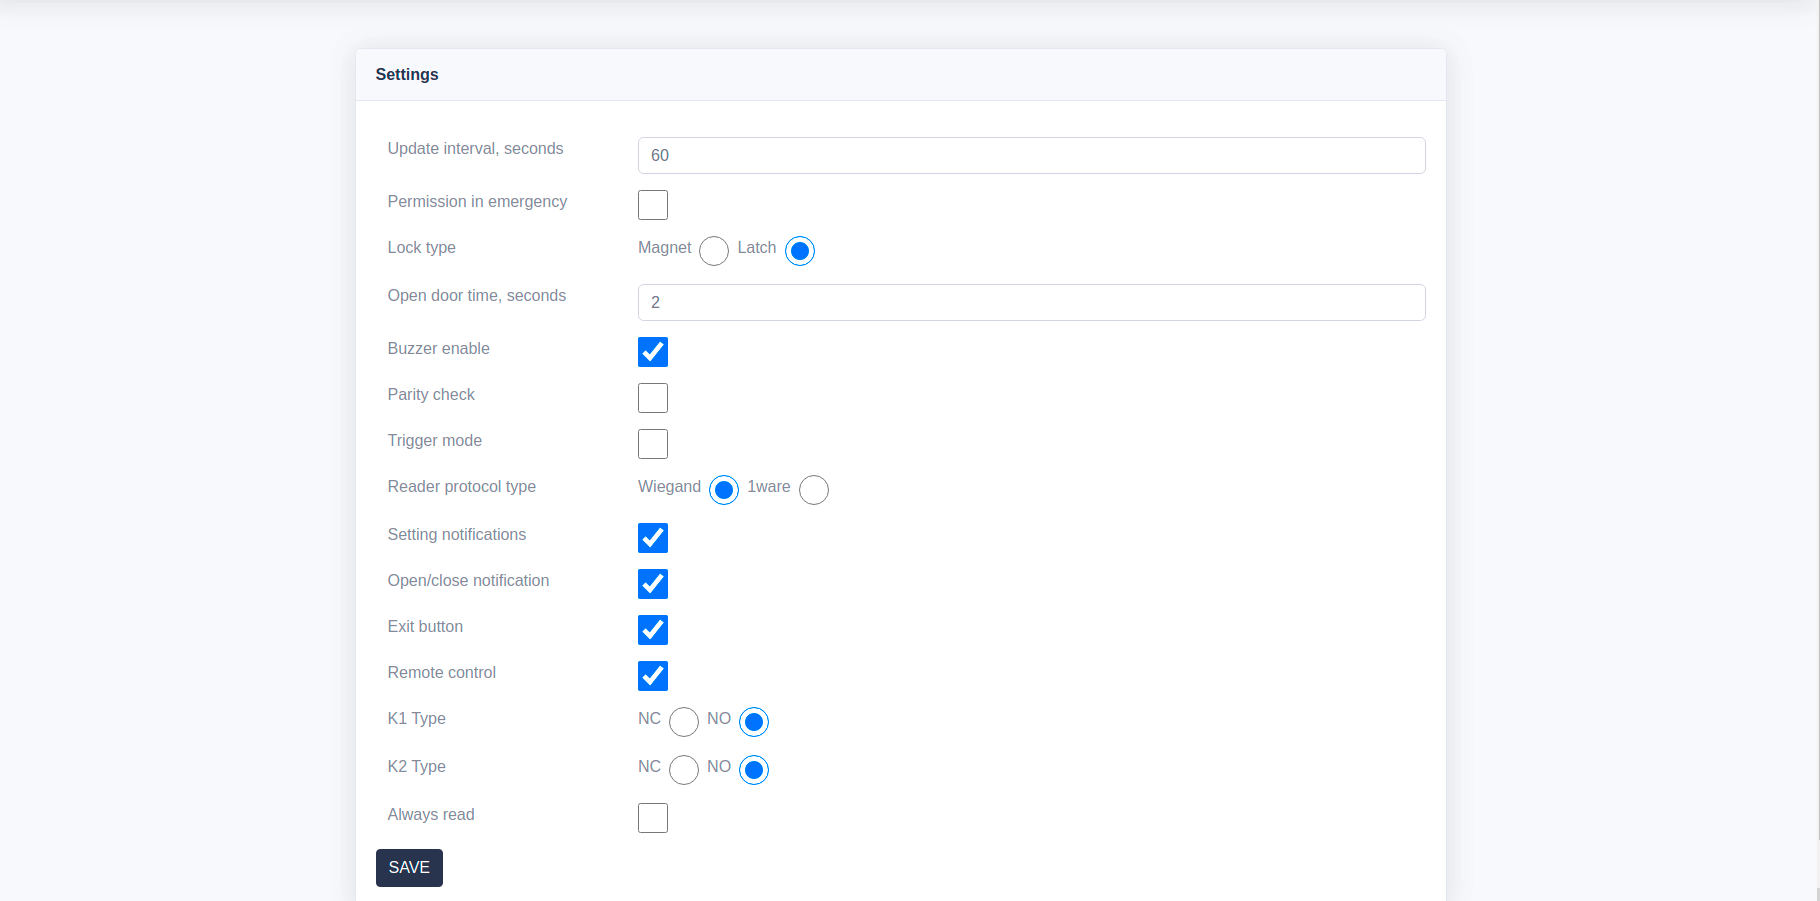 The built-in web admin panel of the device